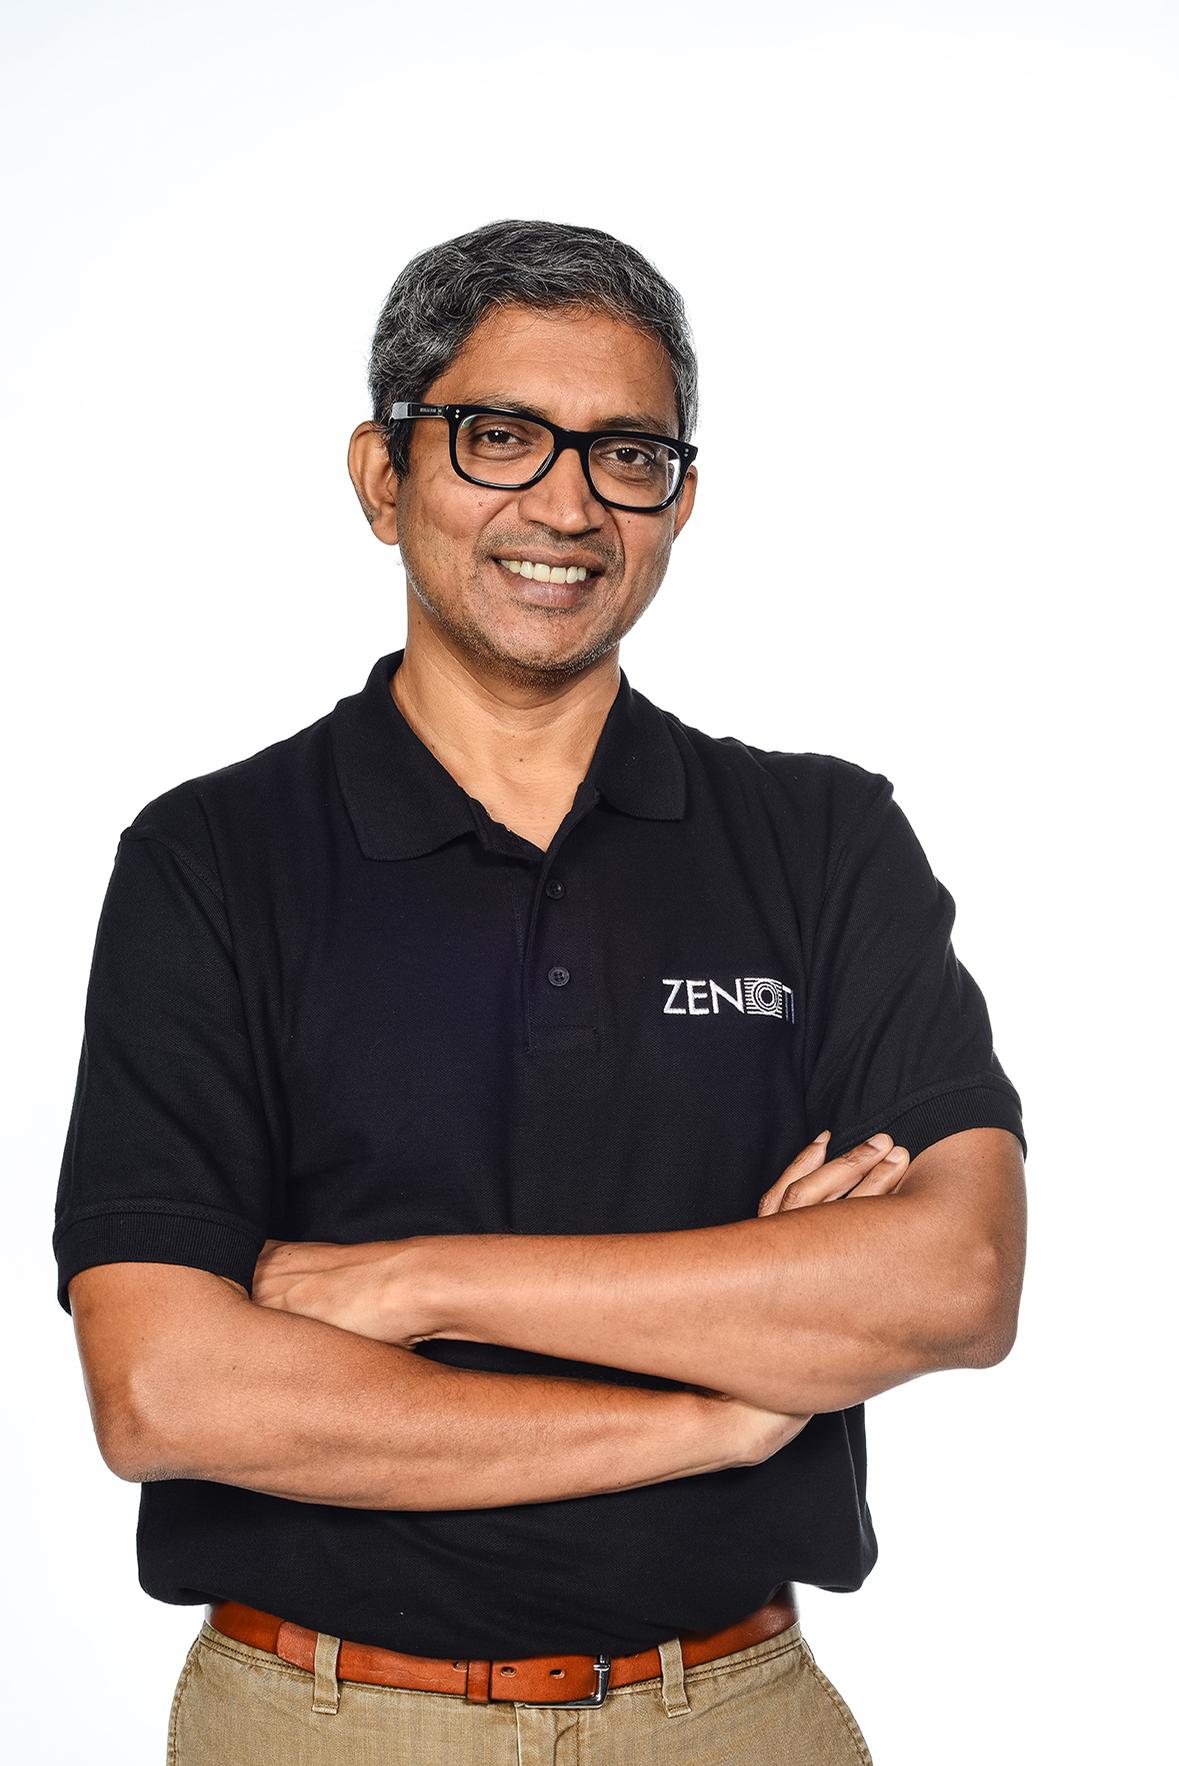 Zenoti CEO & co-founder Sudheer Koneru says the company is on target to achieve 130% growth in 2019
